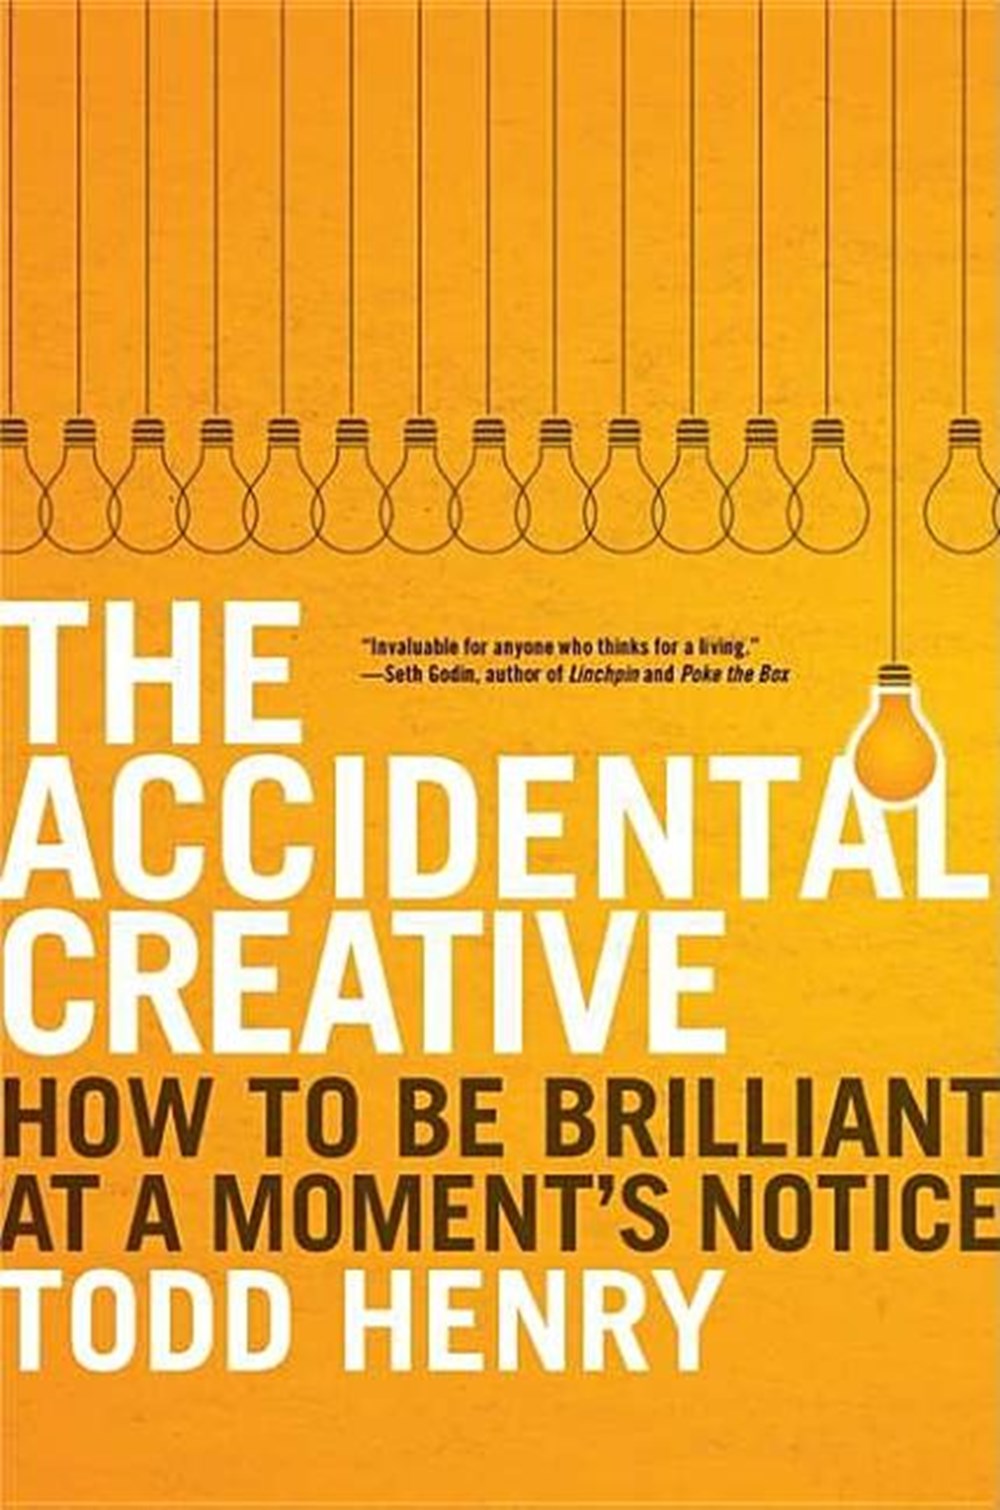 Accidental Creative How to Be Brilliant at a Moment's Notice